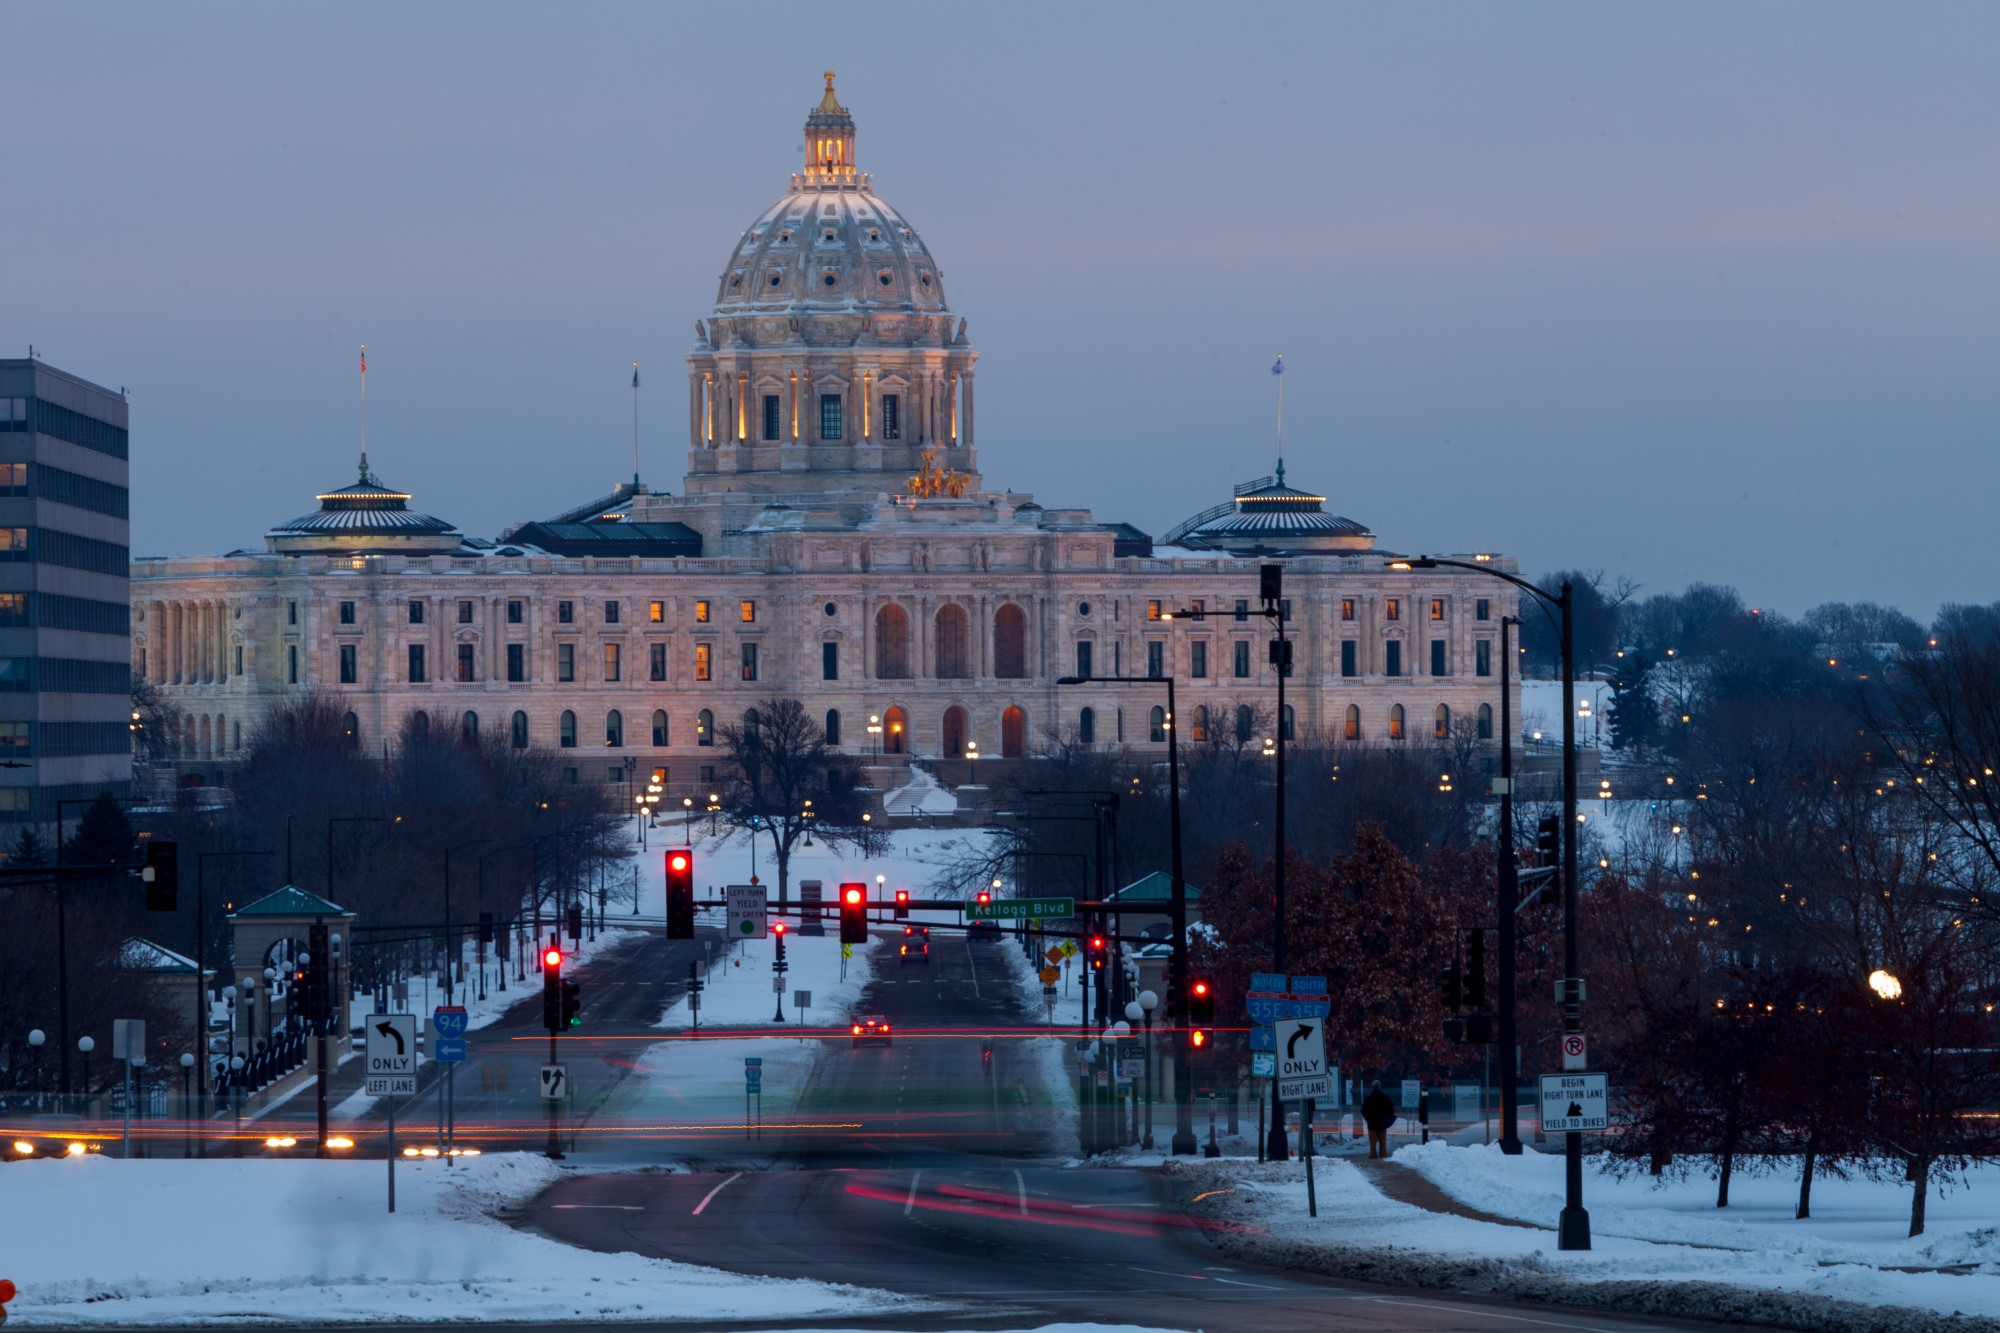 Dawn breaks over the Minnesota State Capitol Building on Wednesday, Jan. 15. (Kamaan Richards / Minnesota Daily)